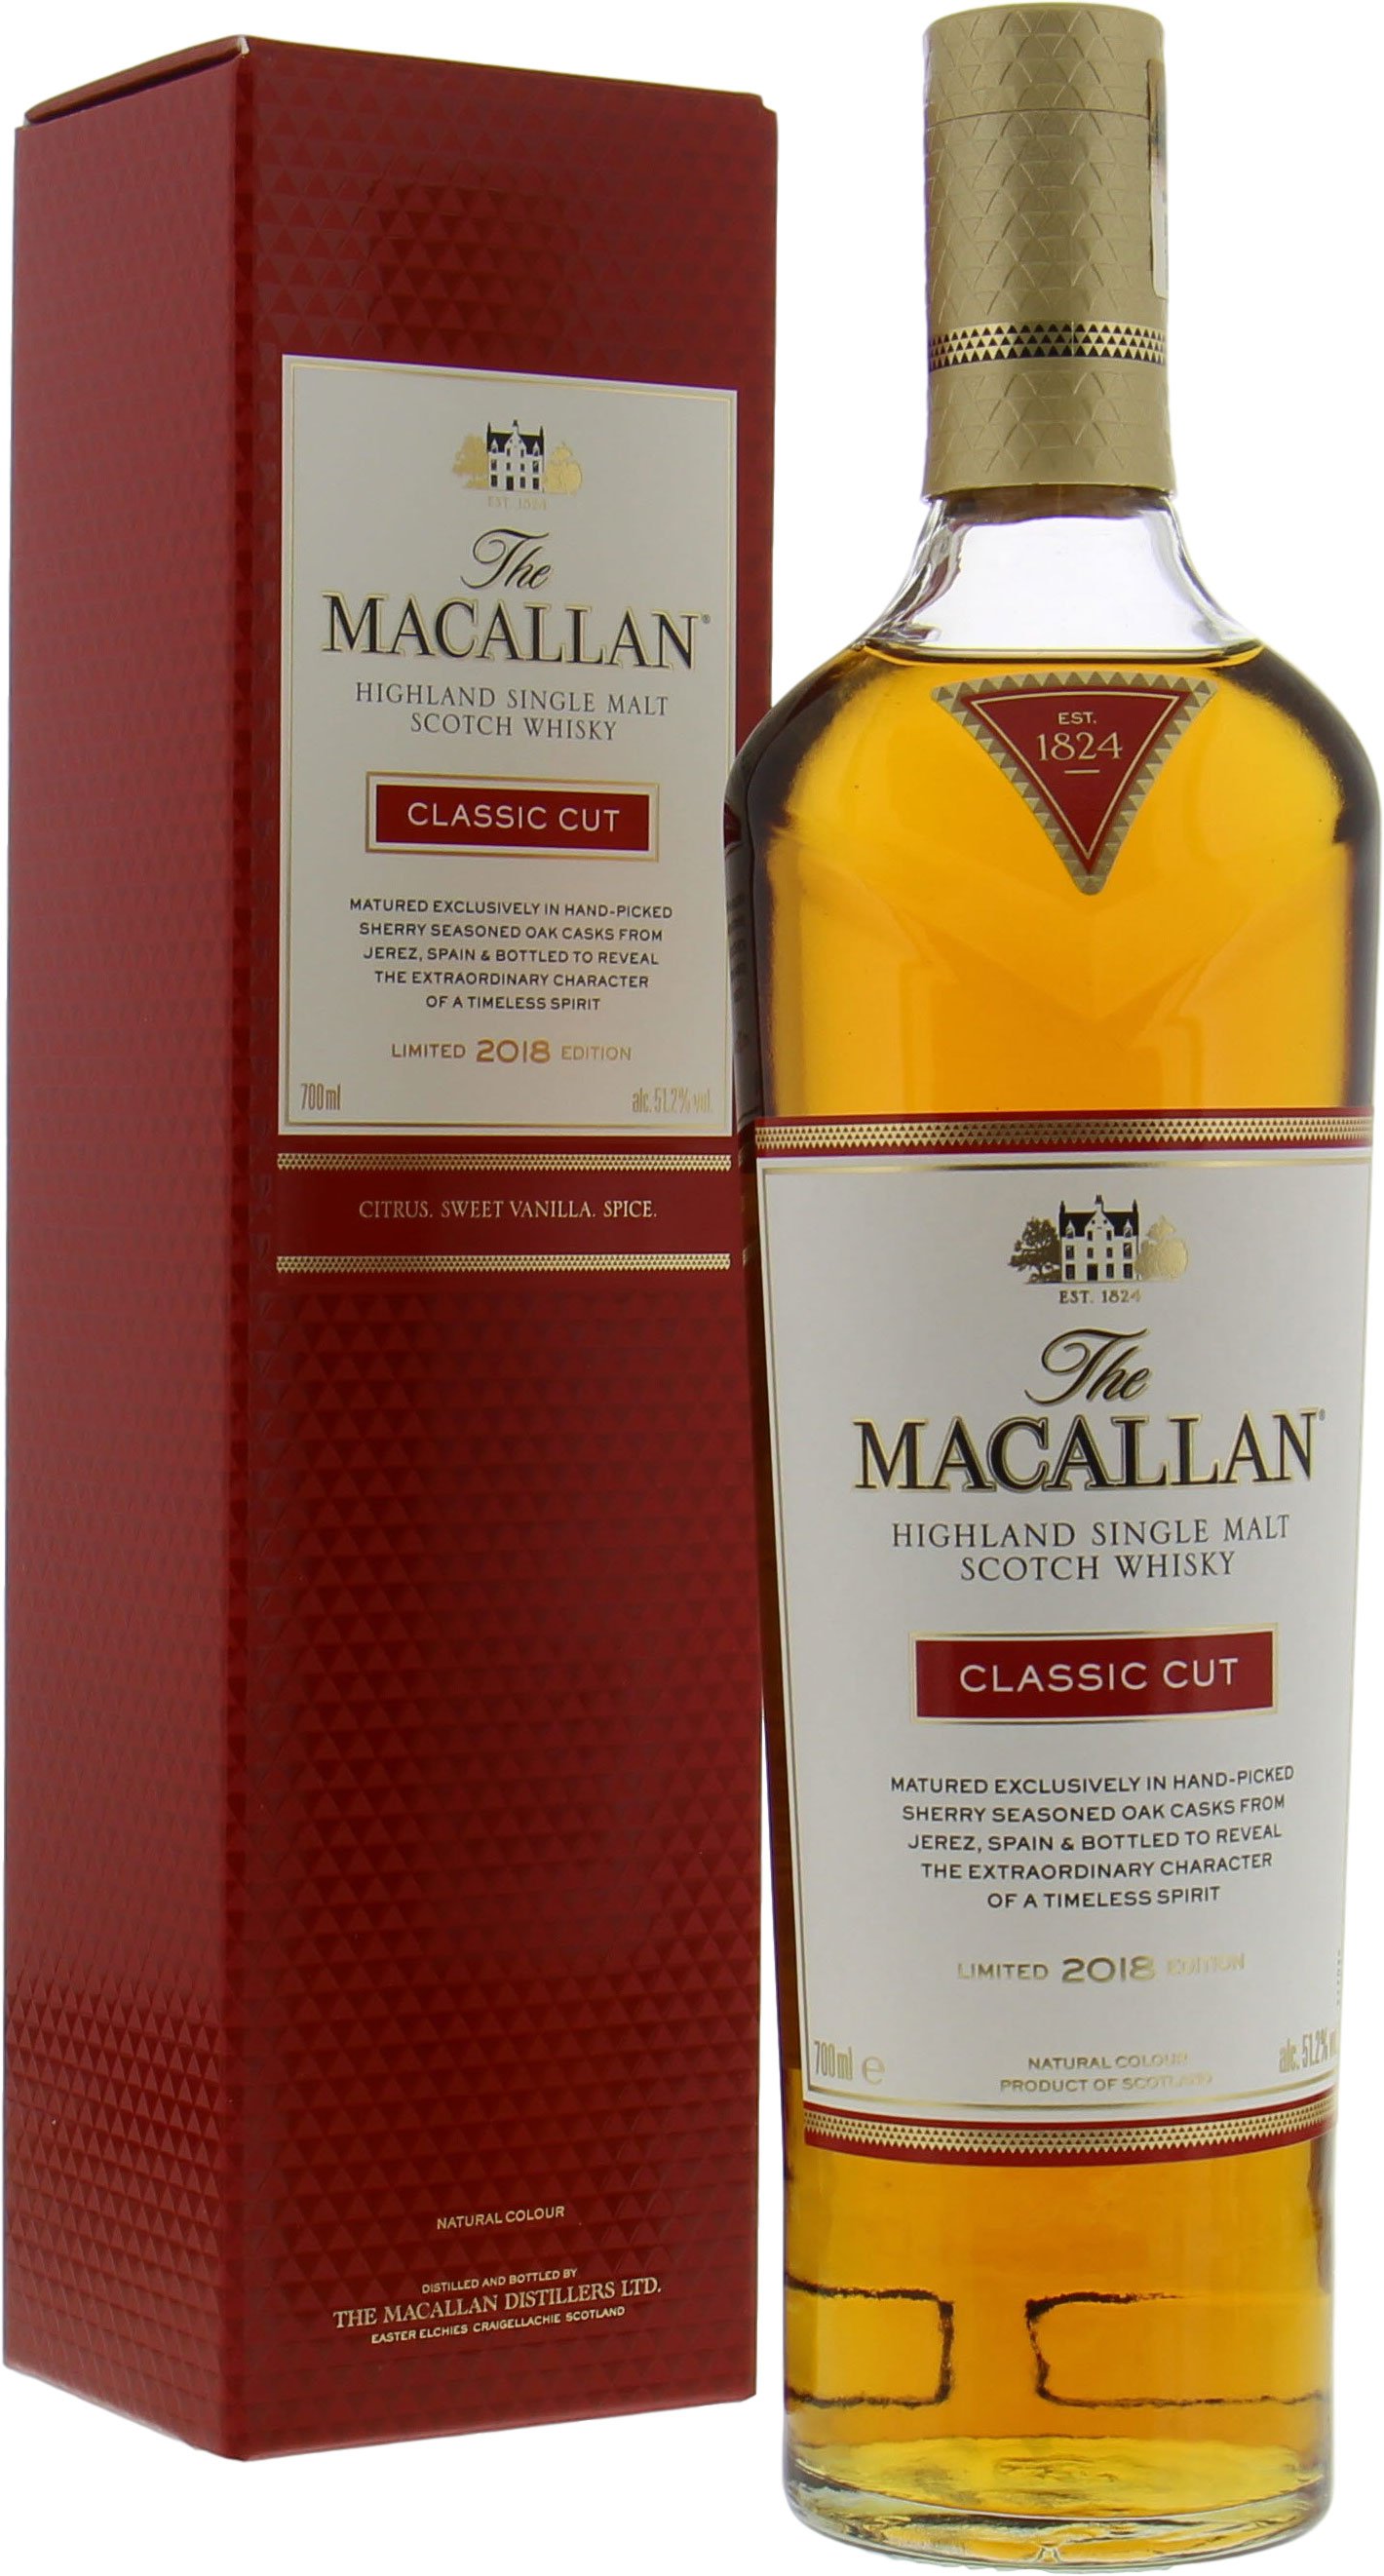 Macallan Classic Cut Limited 2018 Edition 51 2 Nv 0 7 L Buy Online Best Of Wines